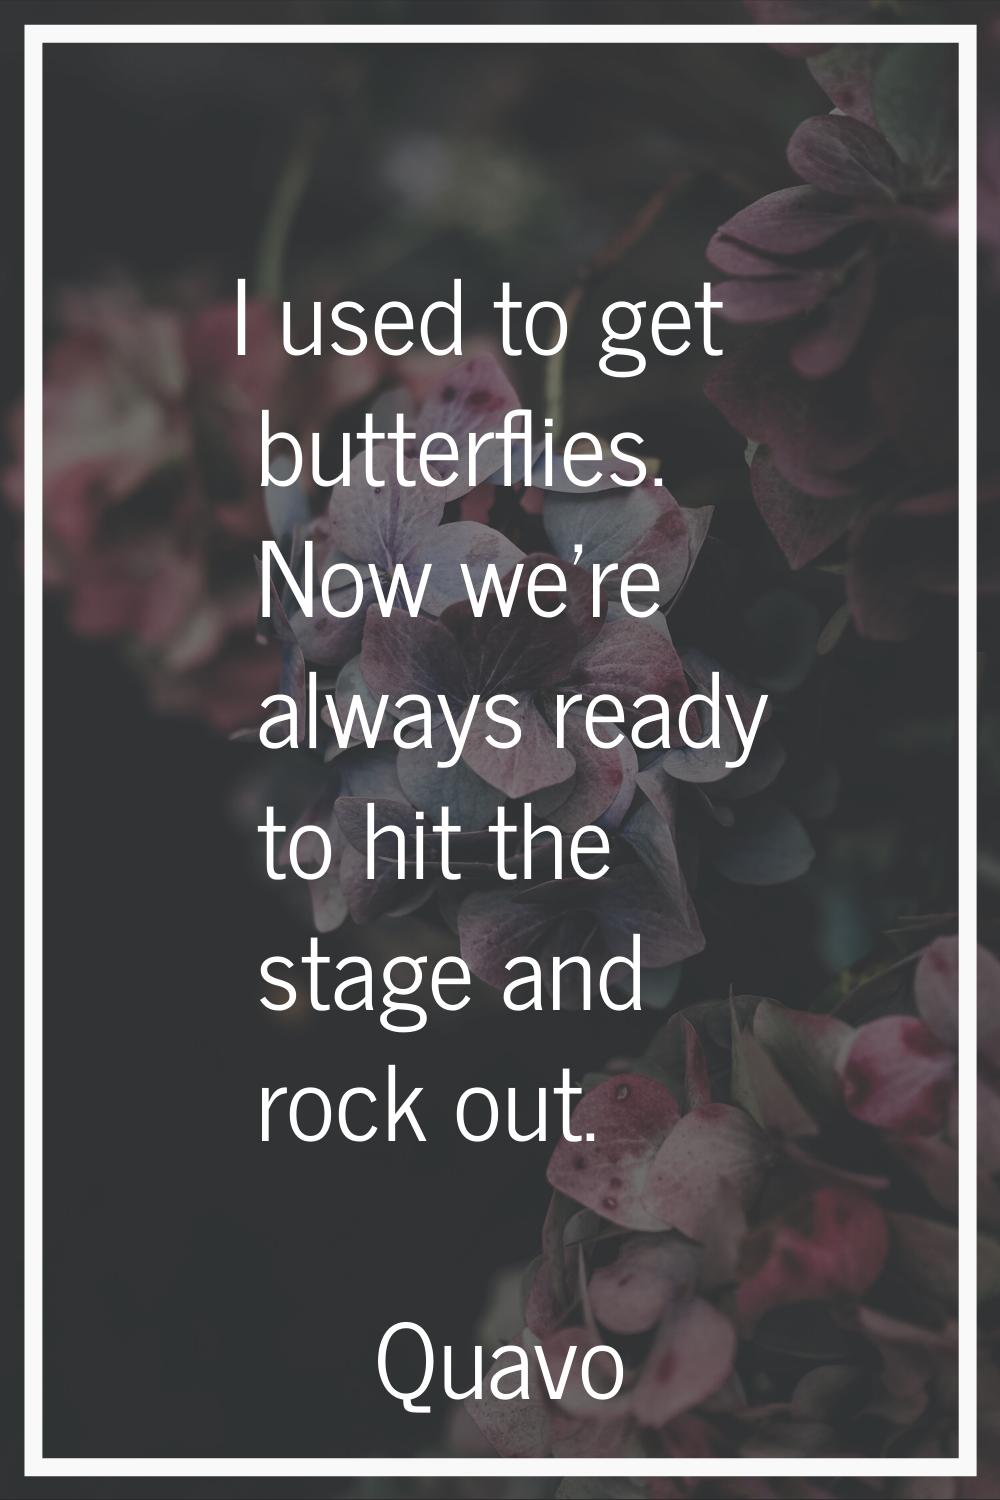 I used to get butterflies. Now we're always ready to hit the stage and rock out.